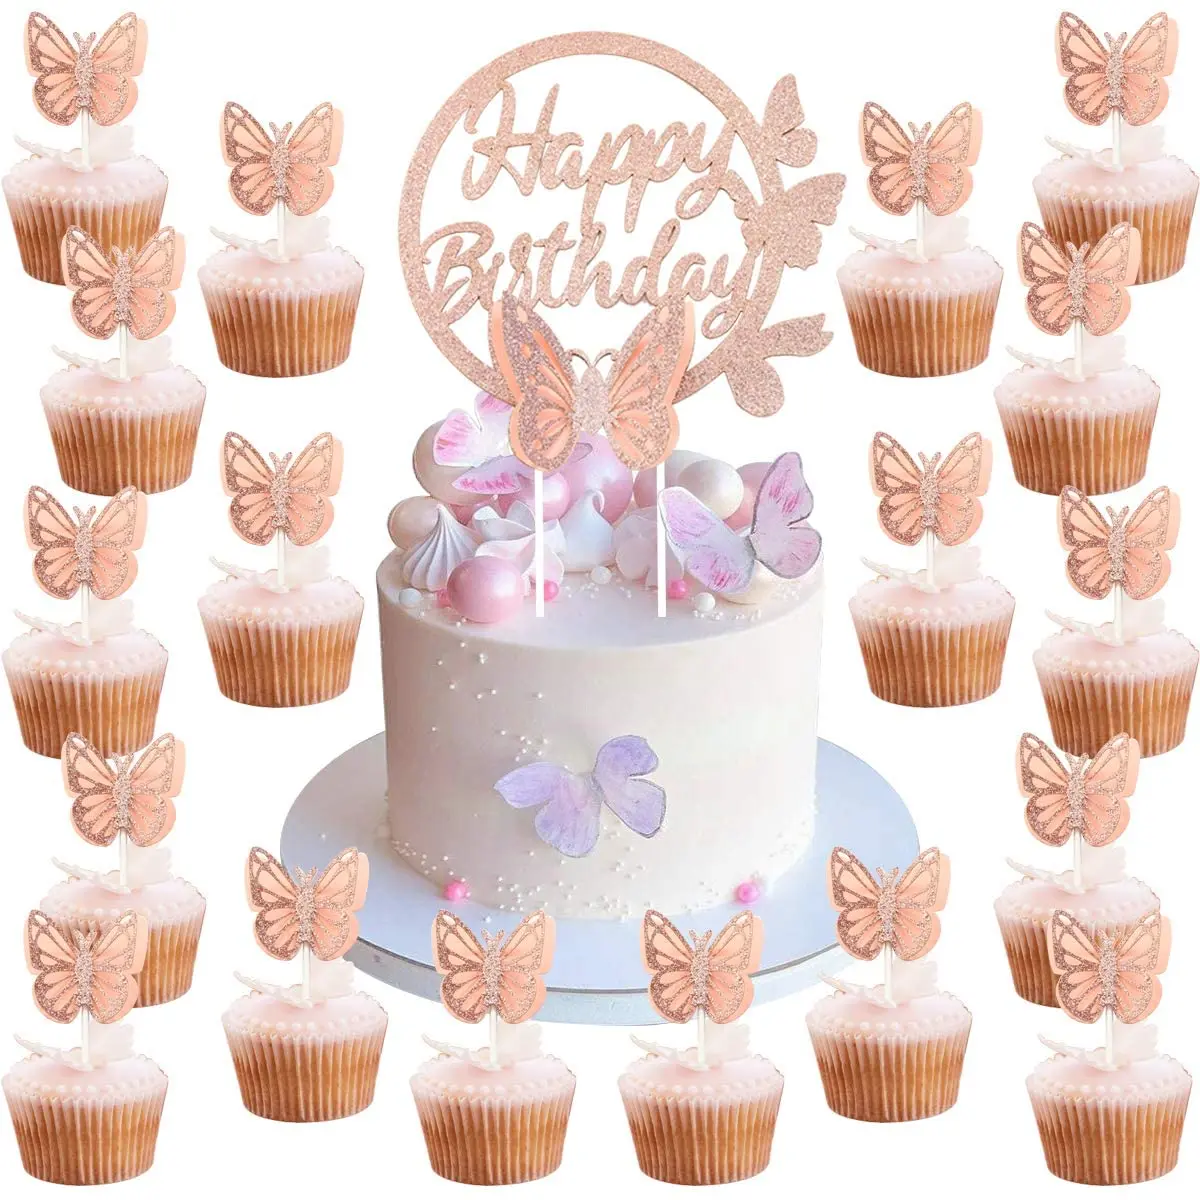 25pcs Rose Gold Glitter Butterfly Cupcake Toppers Happy Birthday Cake Topper Kit for Girls Butterfly Birthday Party Decorations